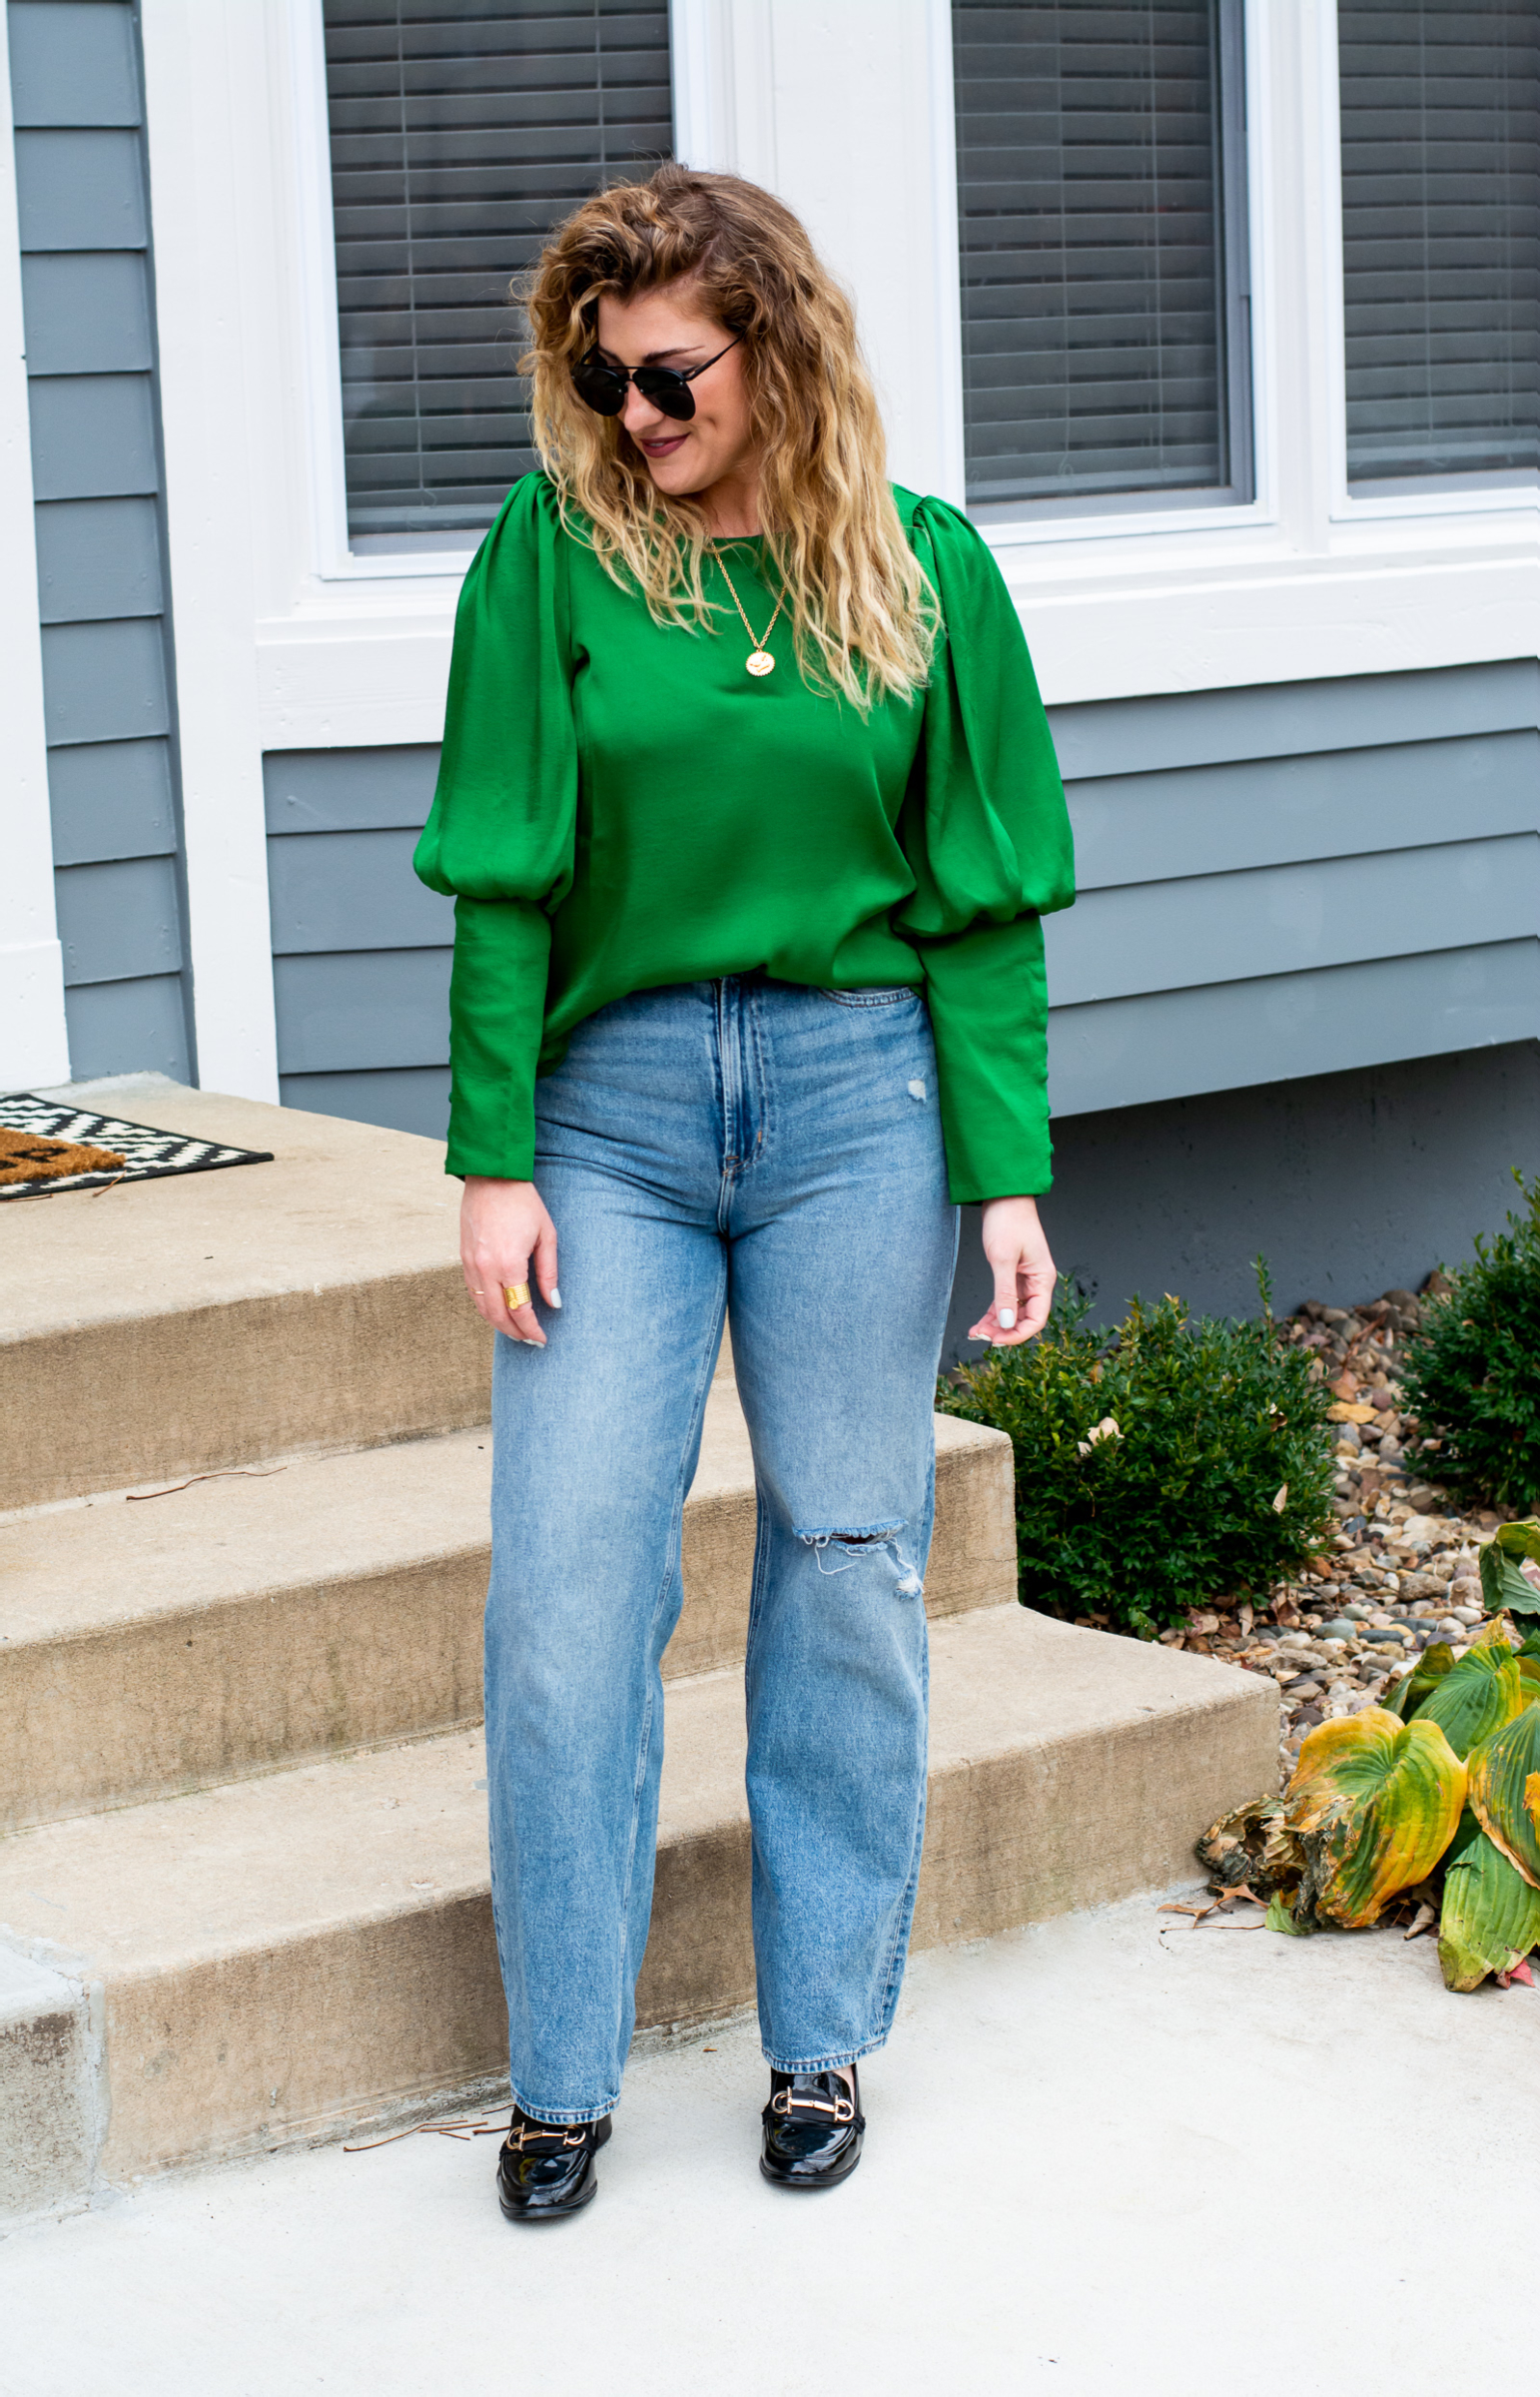 Holiday-ready in a Green Satin Blouse and Wide-leg Jeans. | LSR